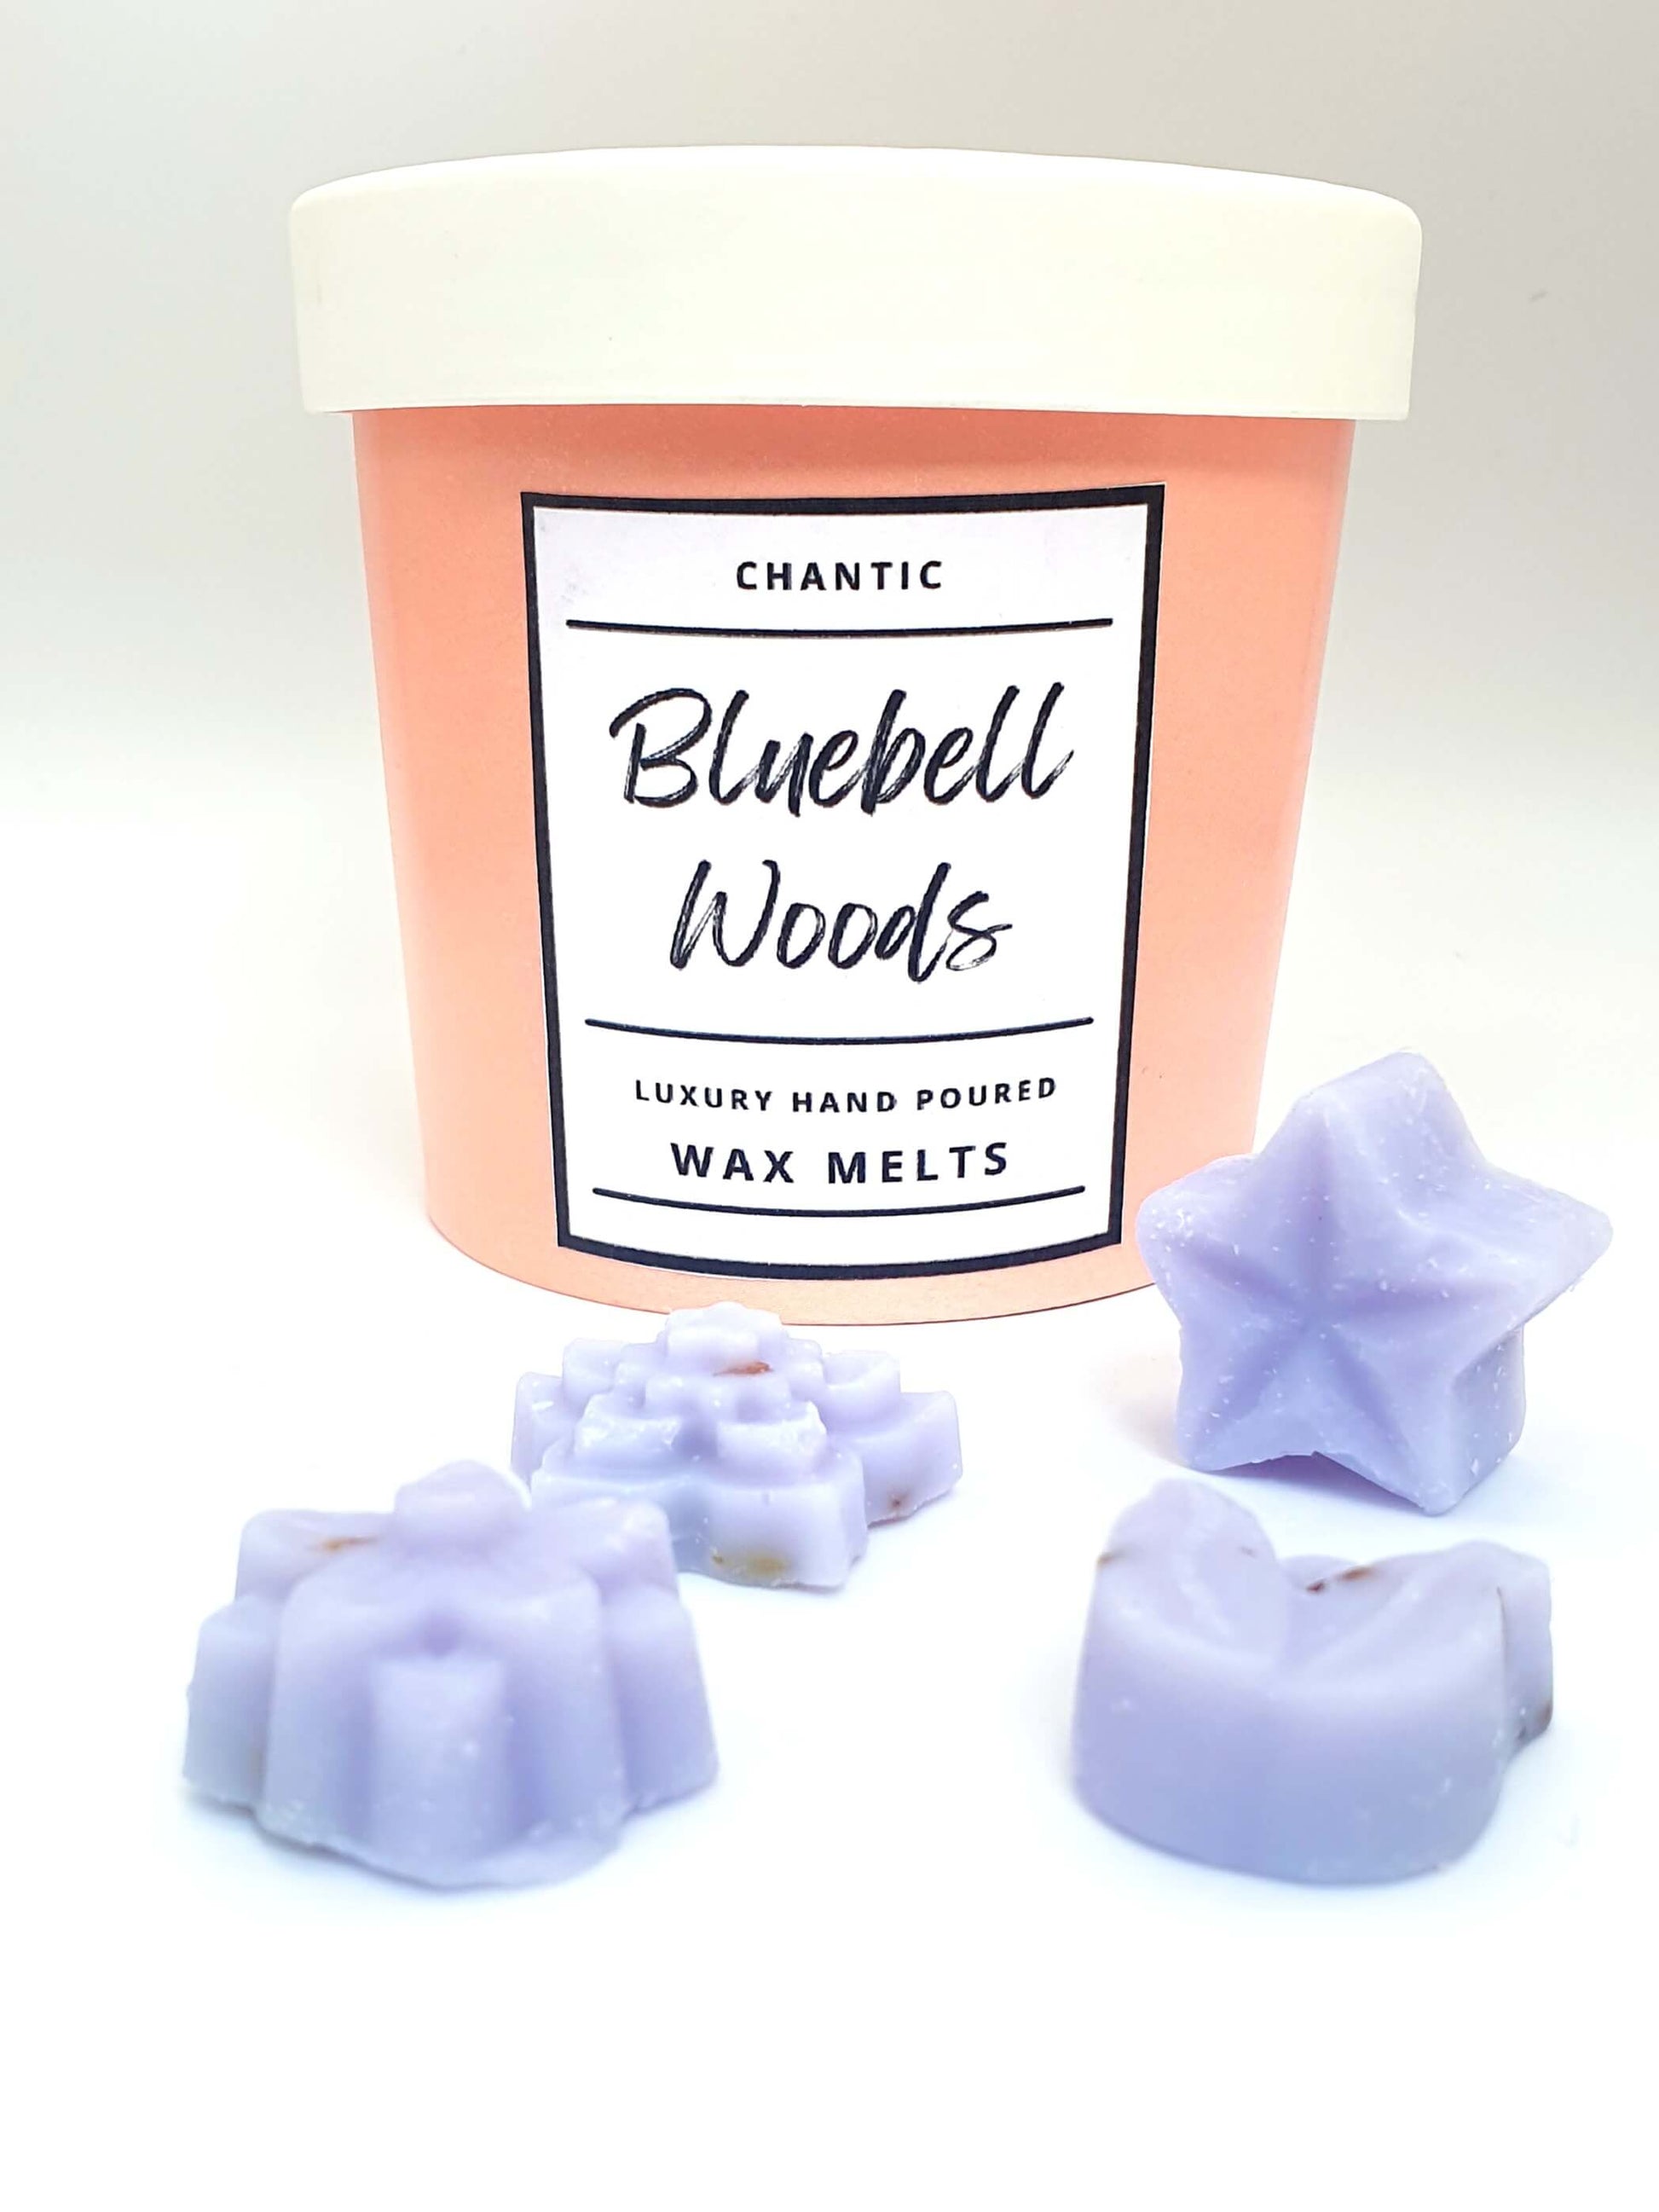 highly scented wax melts, waxandmelt, candles and wax melts